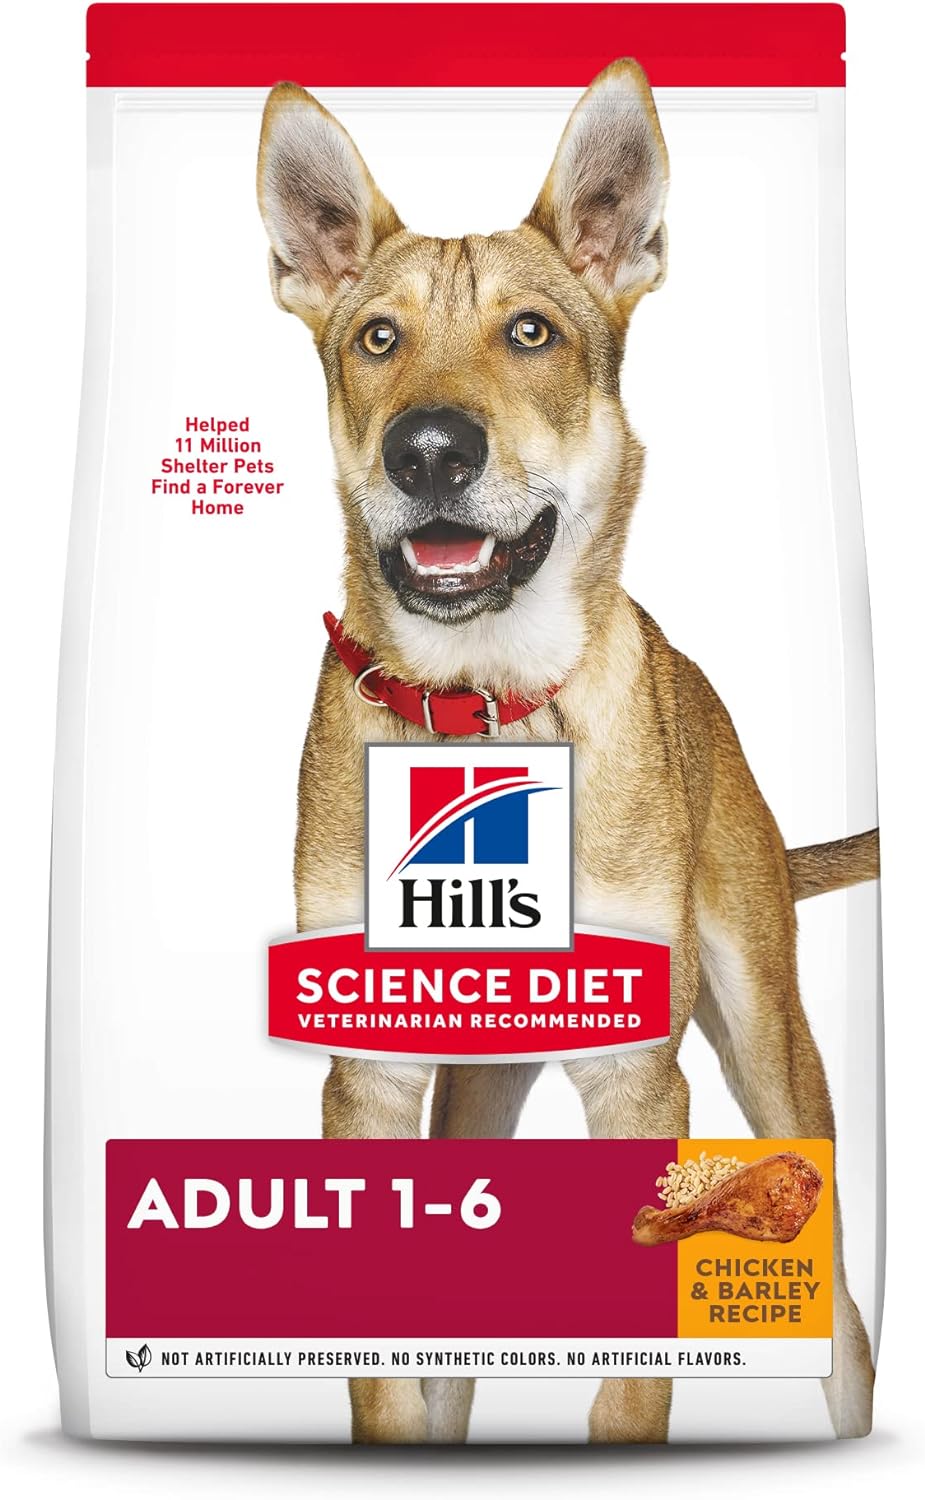 Hills Science Diet Dog Food: 35-lb Pet Nutrition Dry Adult Dog Food $51.34, 12-Pack 12.8-Oz Cans Adult Wet Dog Food $27.22 or Less w/ S&S + Free Shipping w/ Prime or on $35+